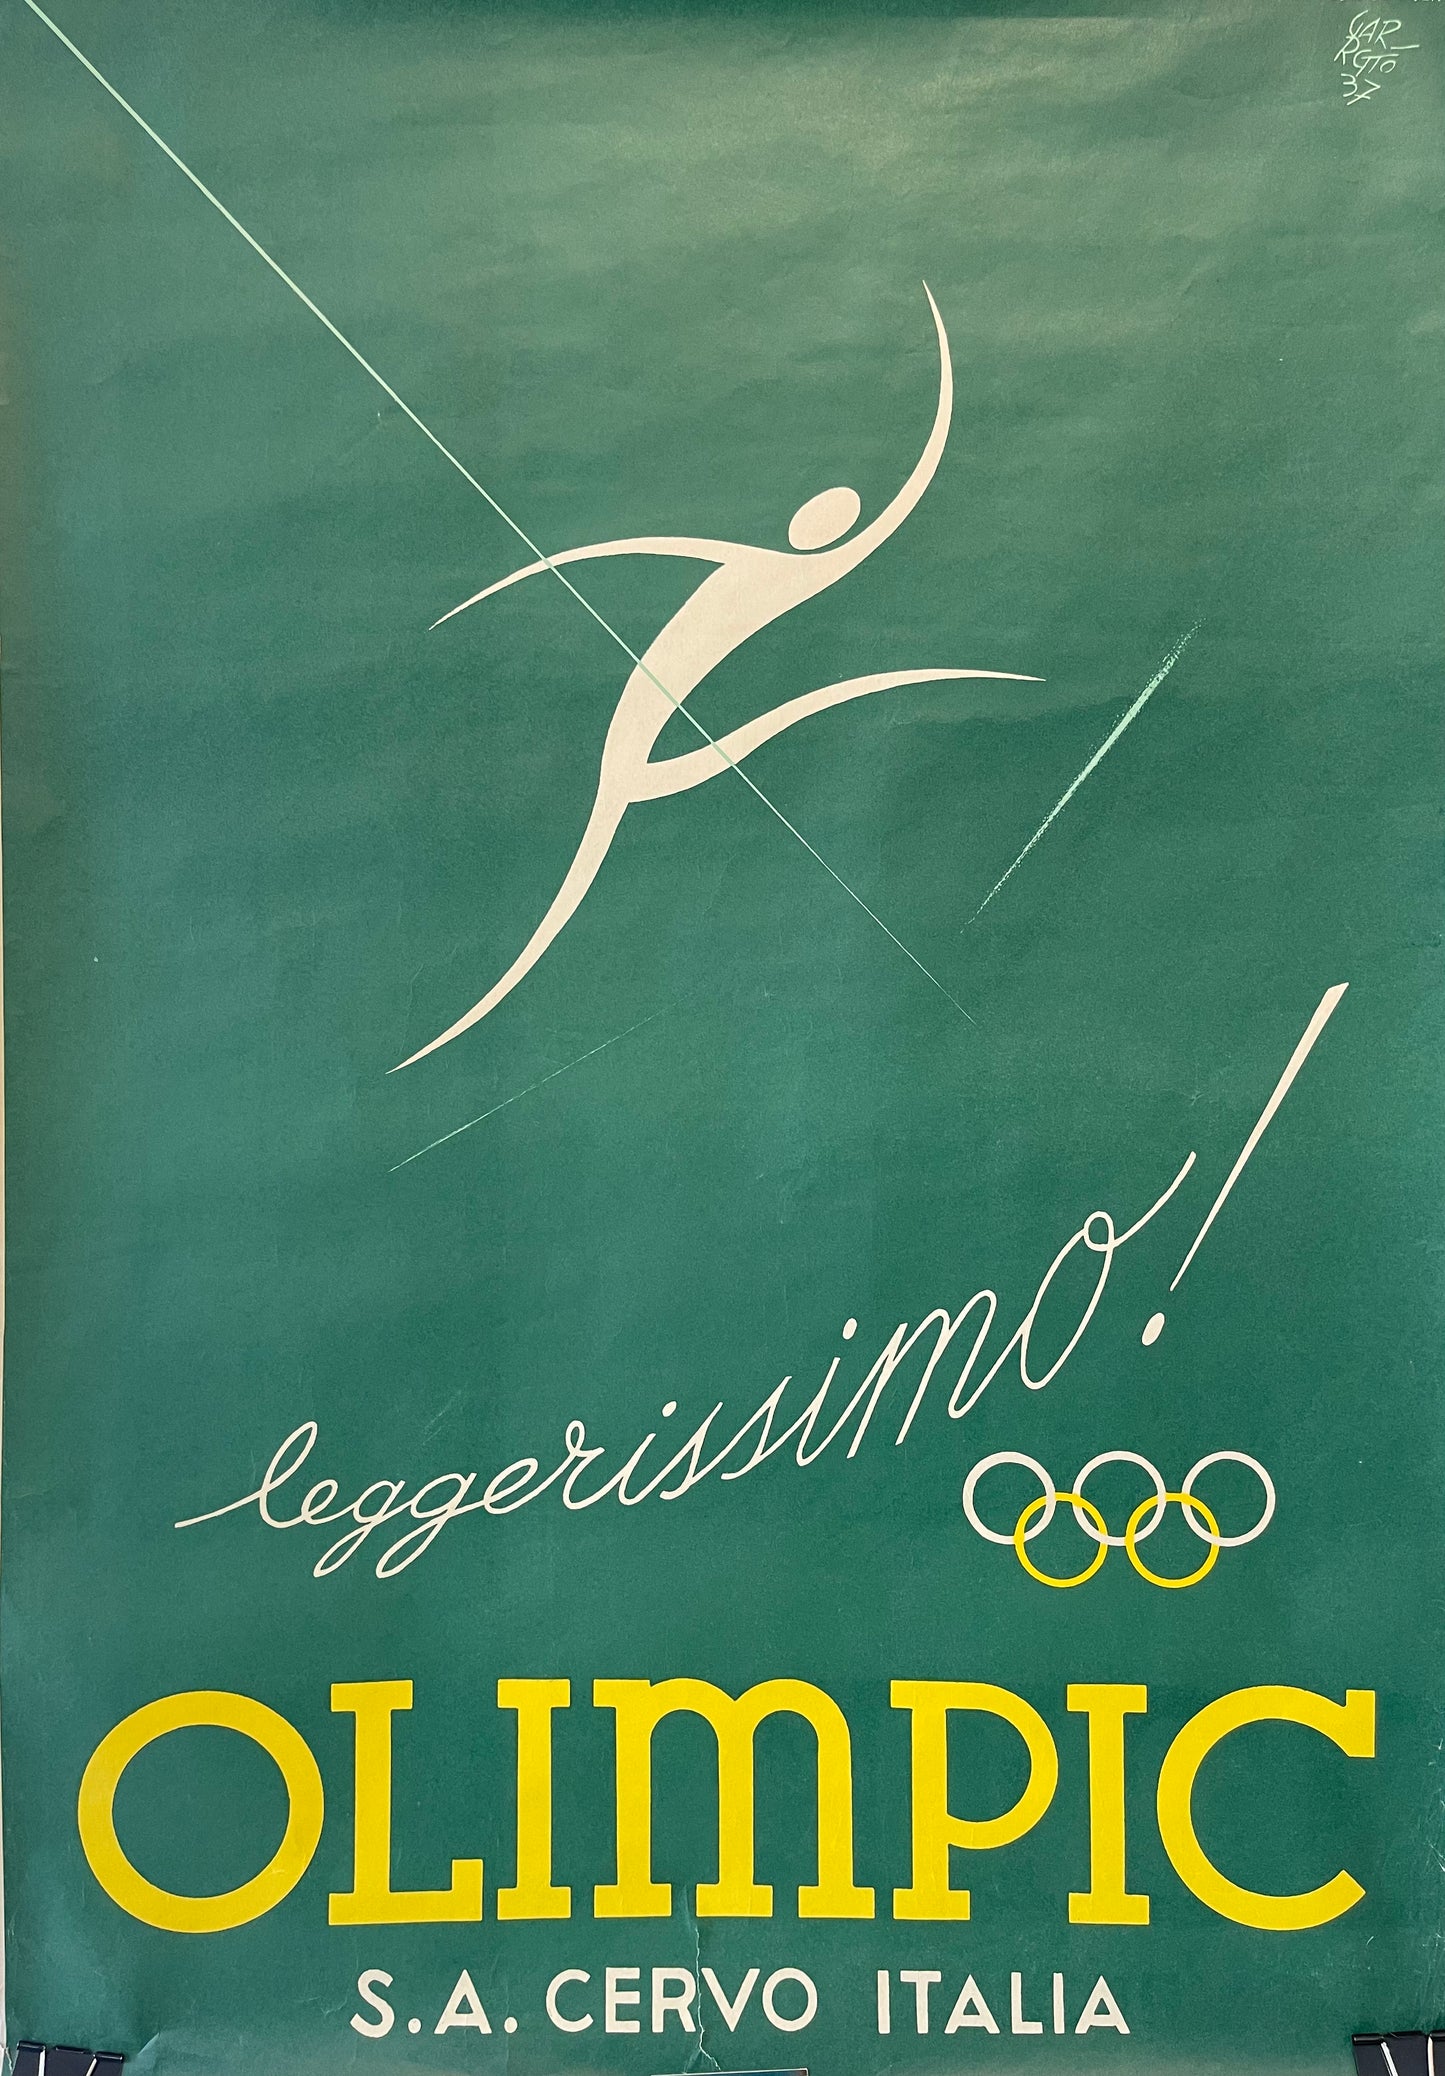 "Very Light" Italy Olympics Poster by Garretto